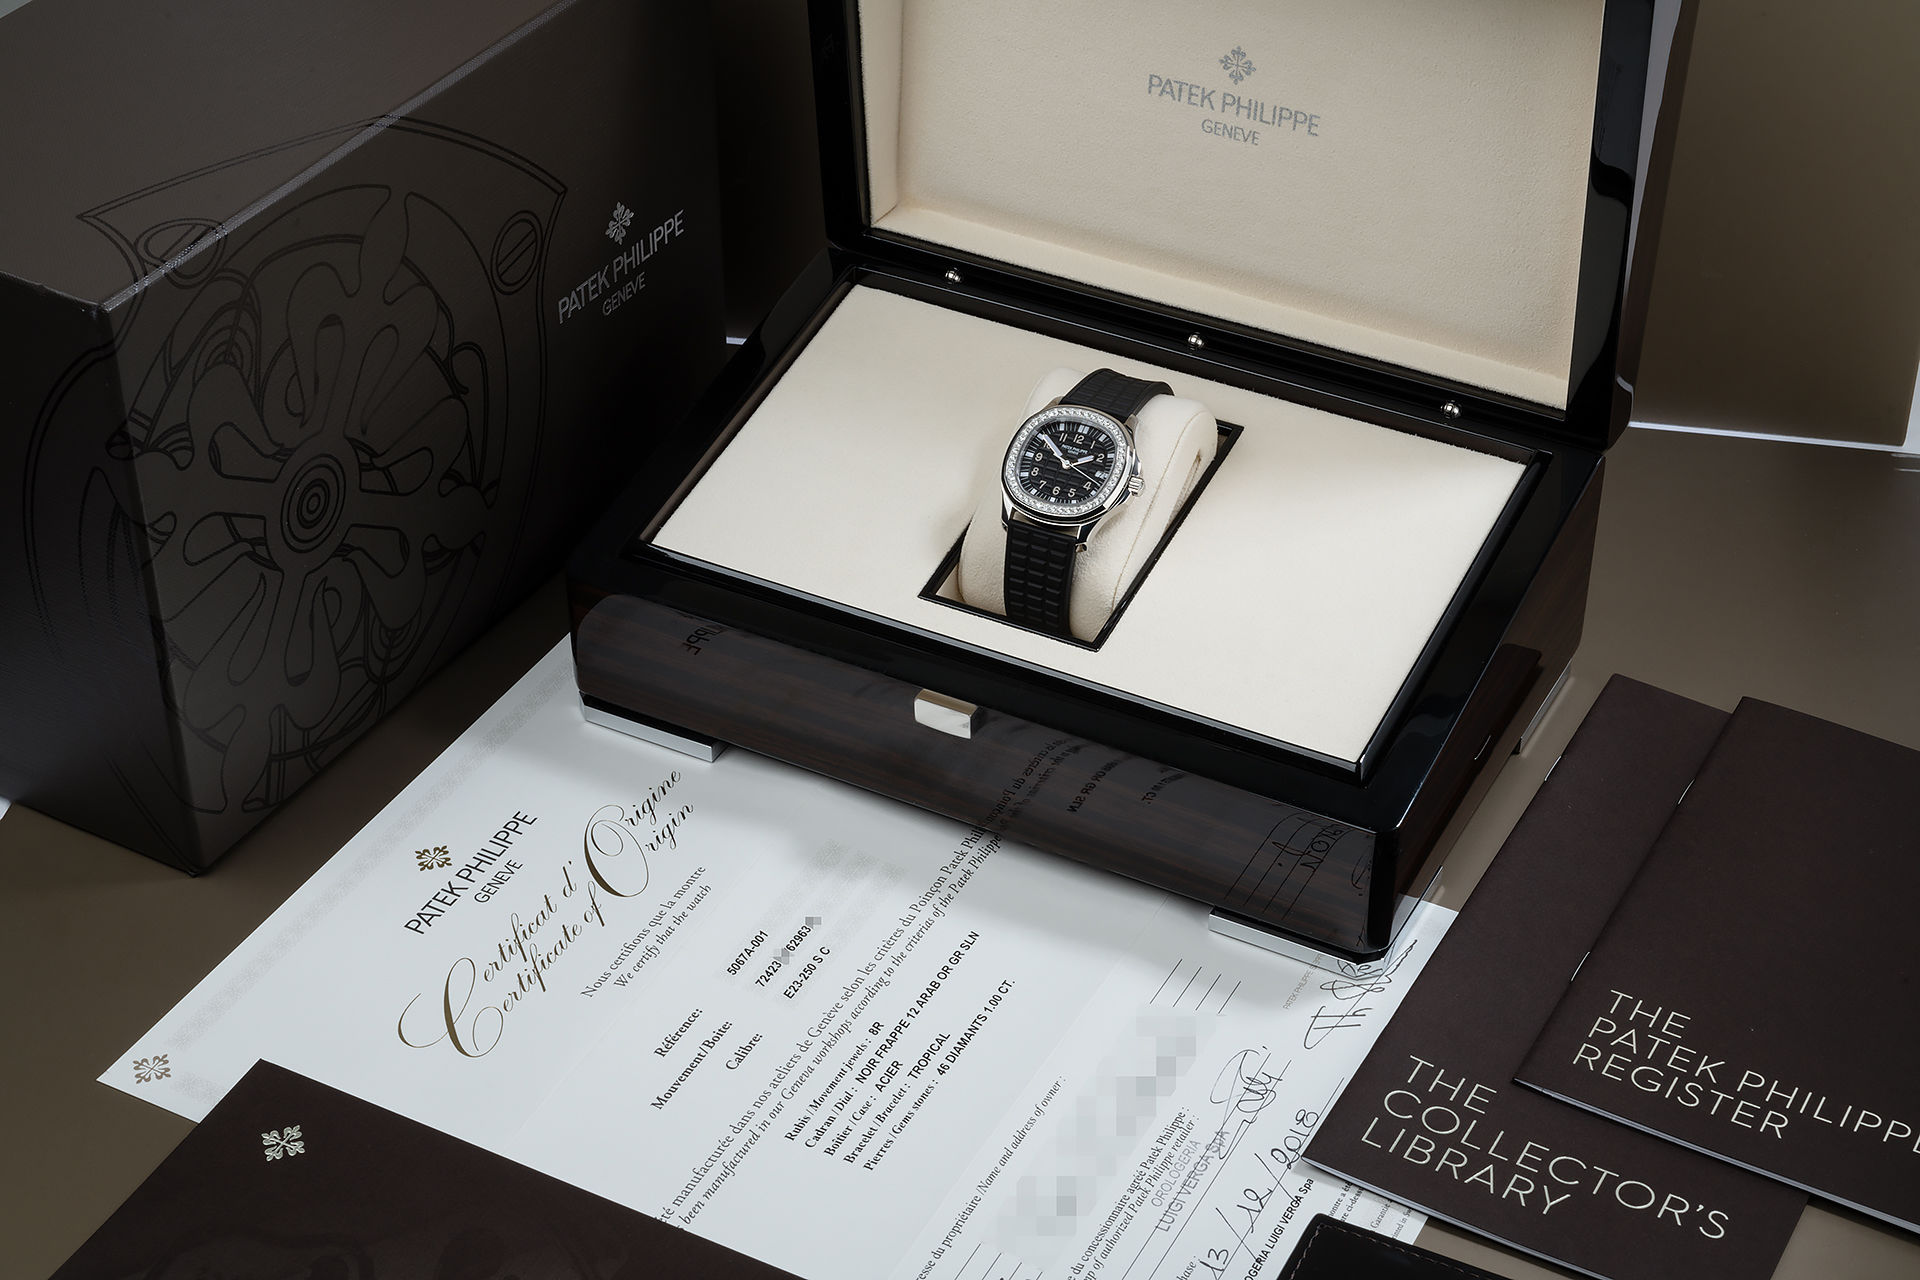 ref 5067A-001 | 'As New' Box & Papers  | Patek Philippe Aquanaut Luce